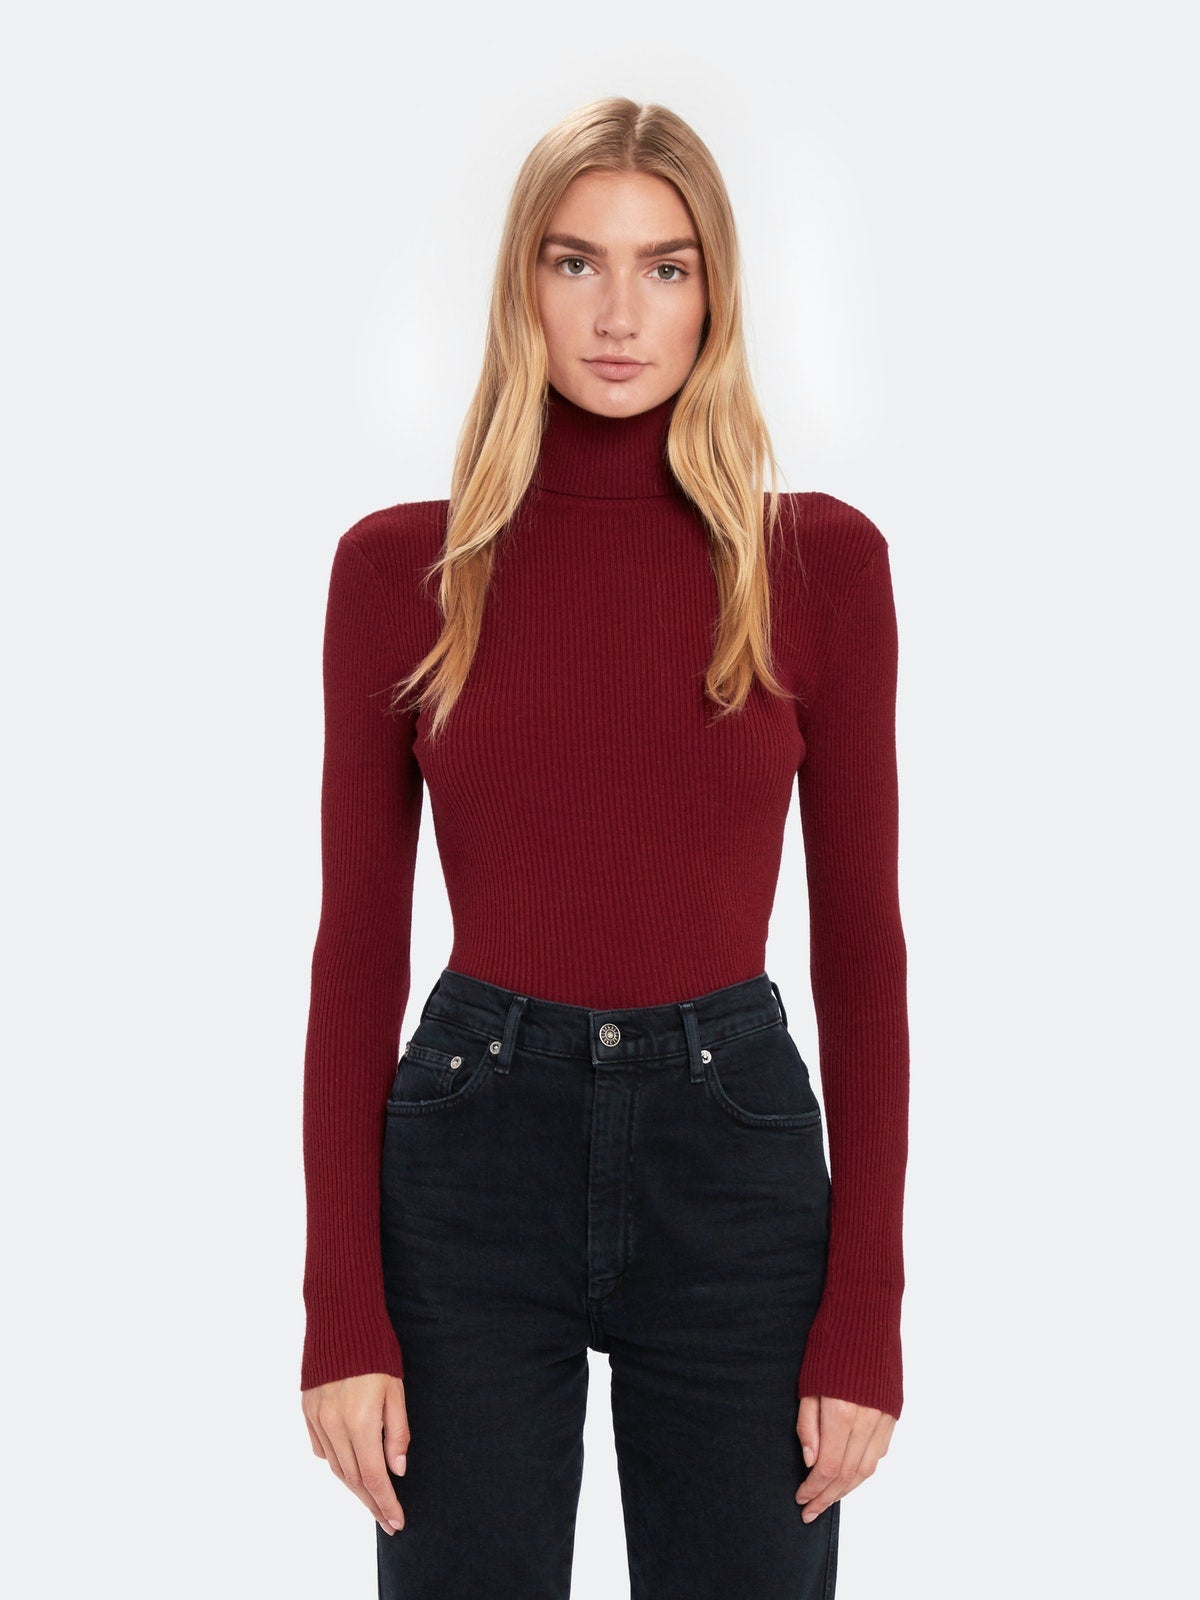 Ribbed Turtleneck Sweater Tops For Layering